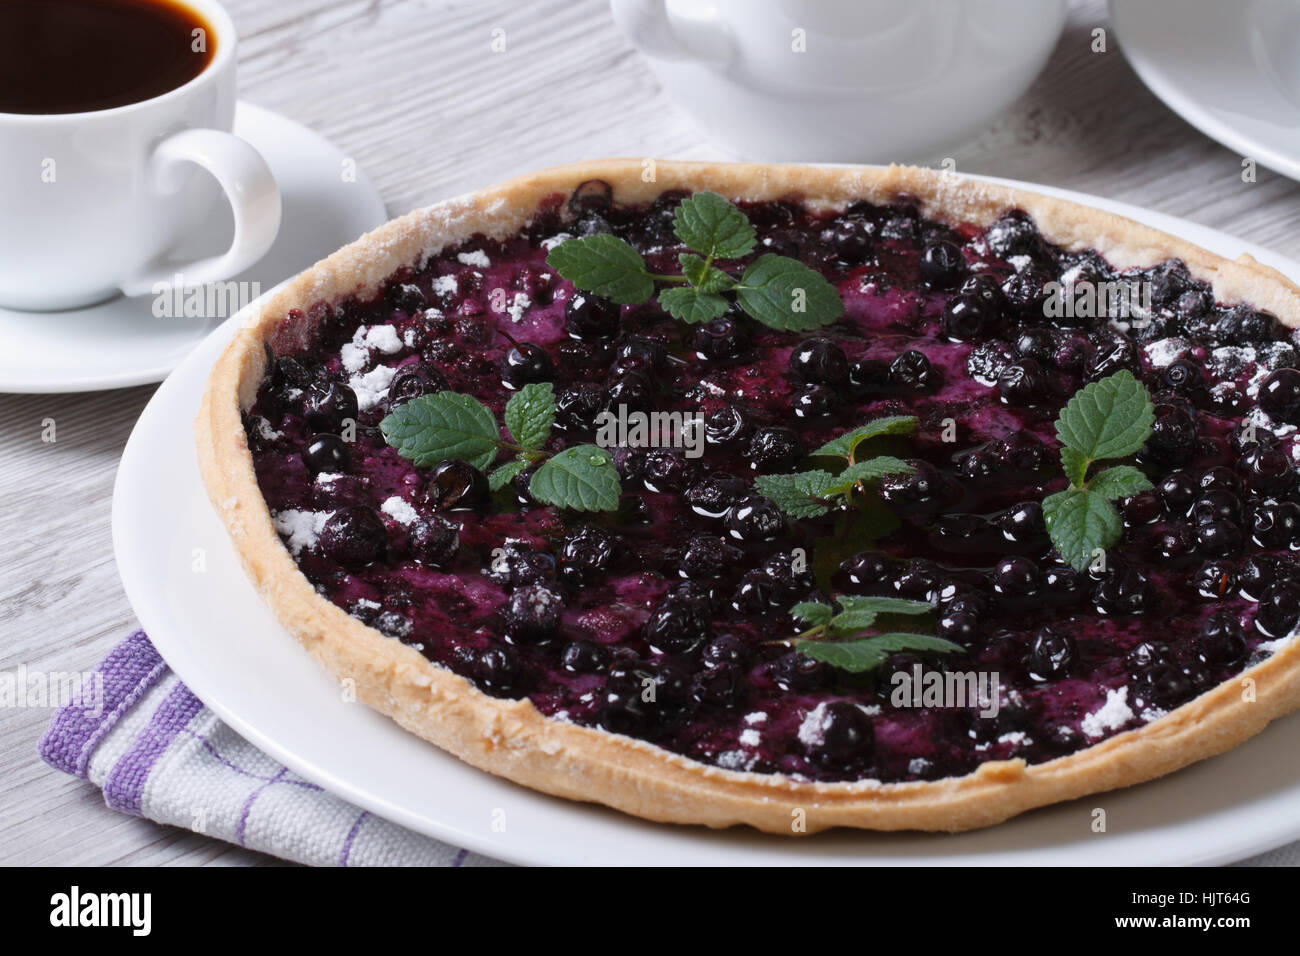 blueberry pie with mint and black coffee on a wooden table horizontal closeup Stock Photo